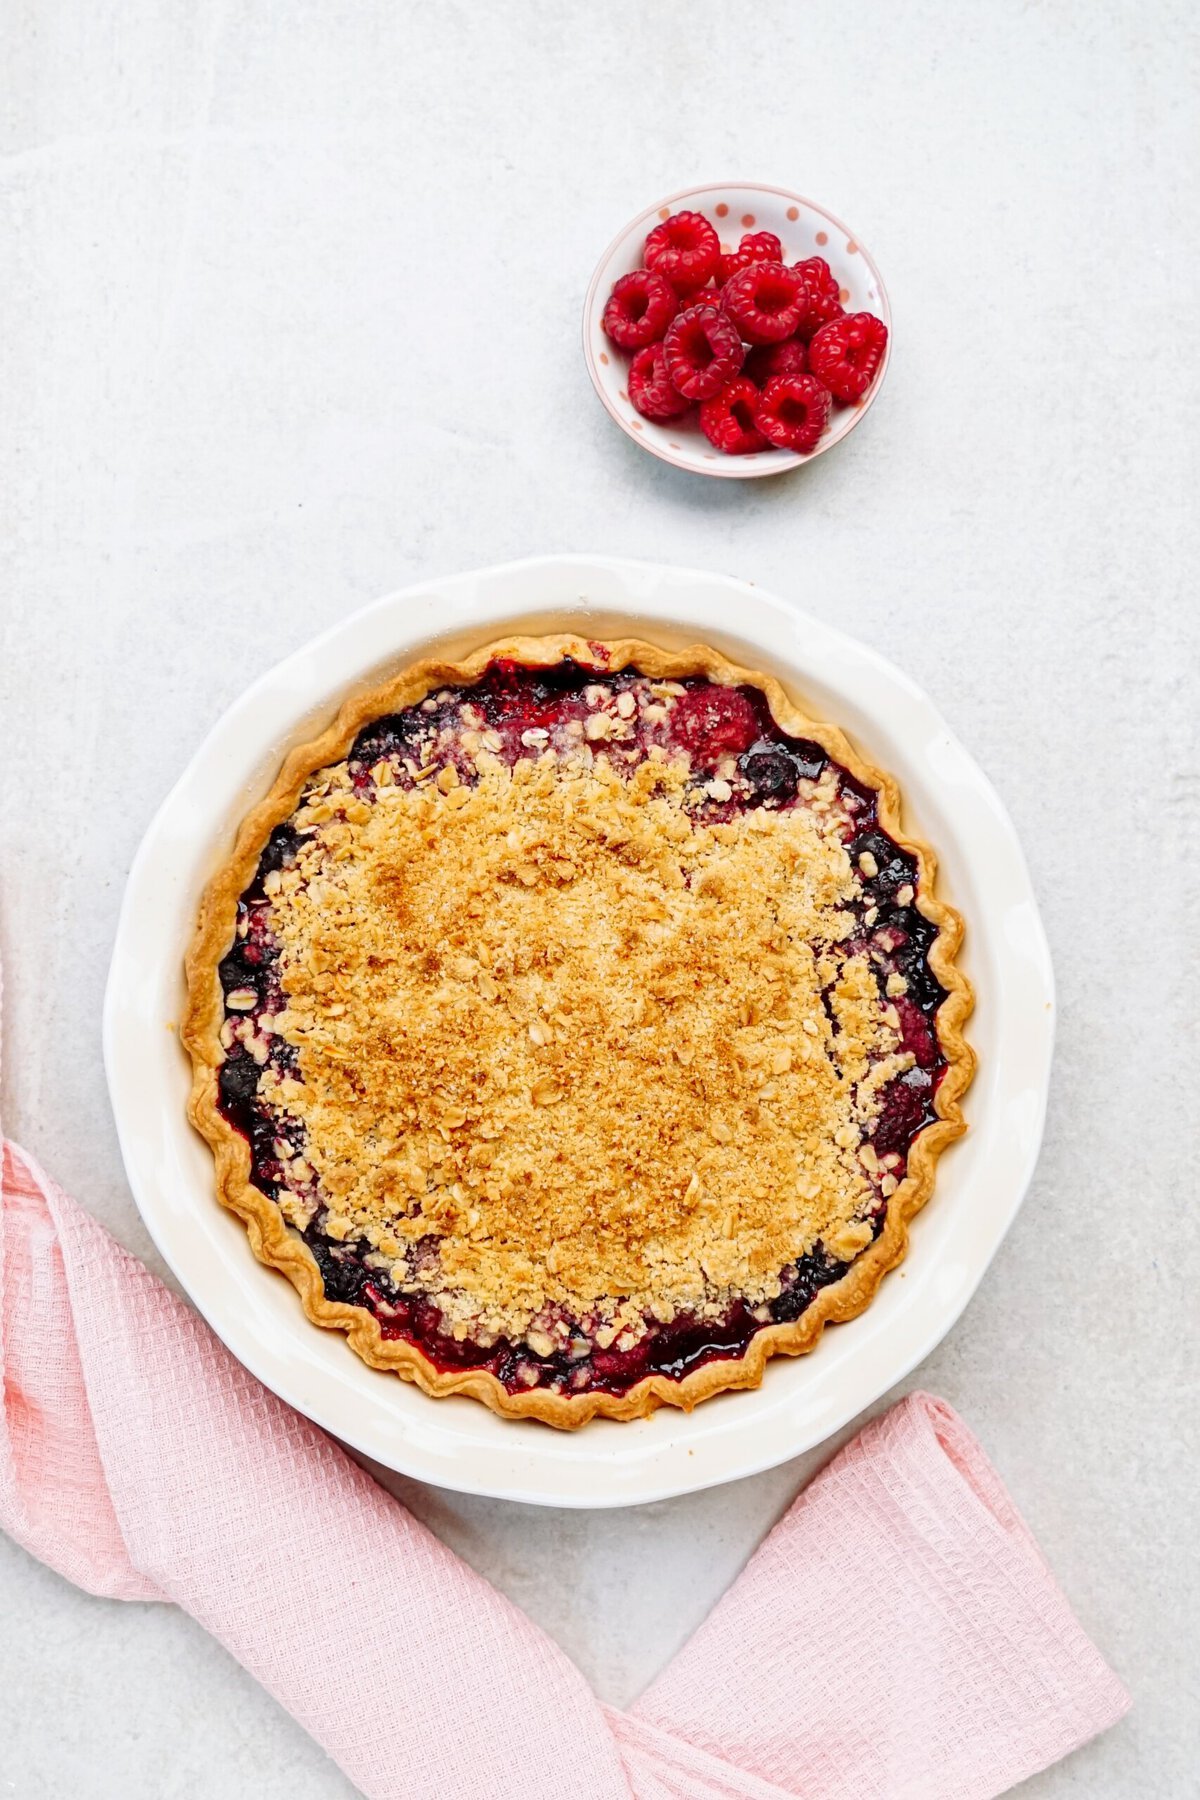 A berry pie with a crumb topping on a white surface. A small bowl of fresh raspberries and a pink cloth are nearby.